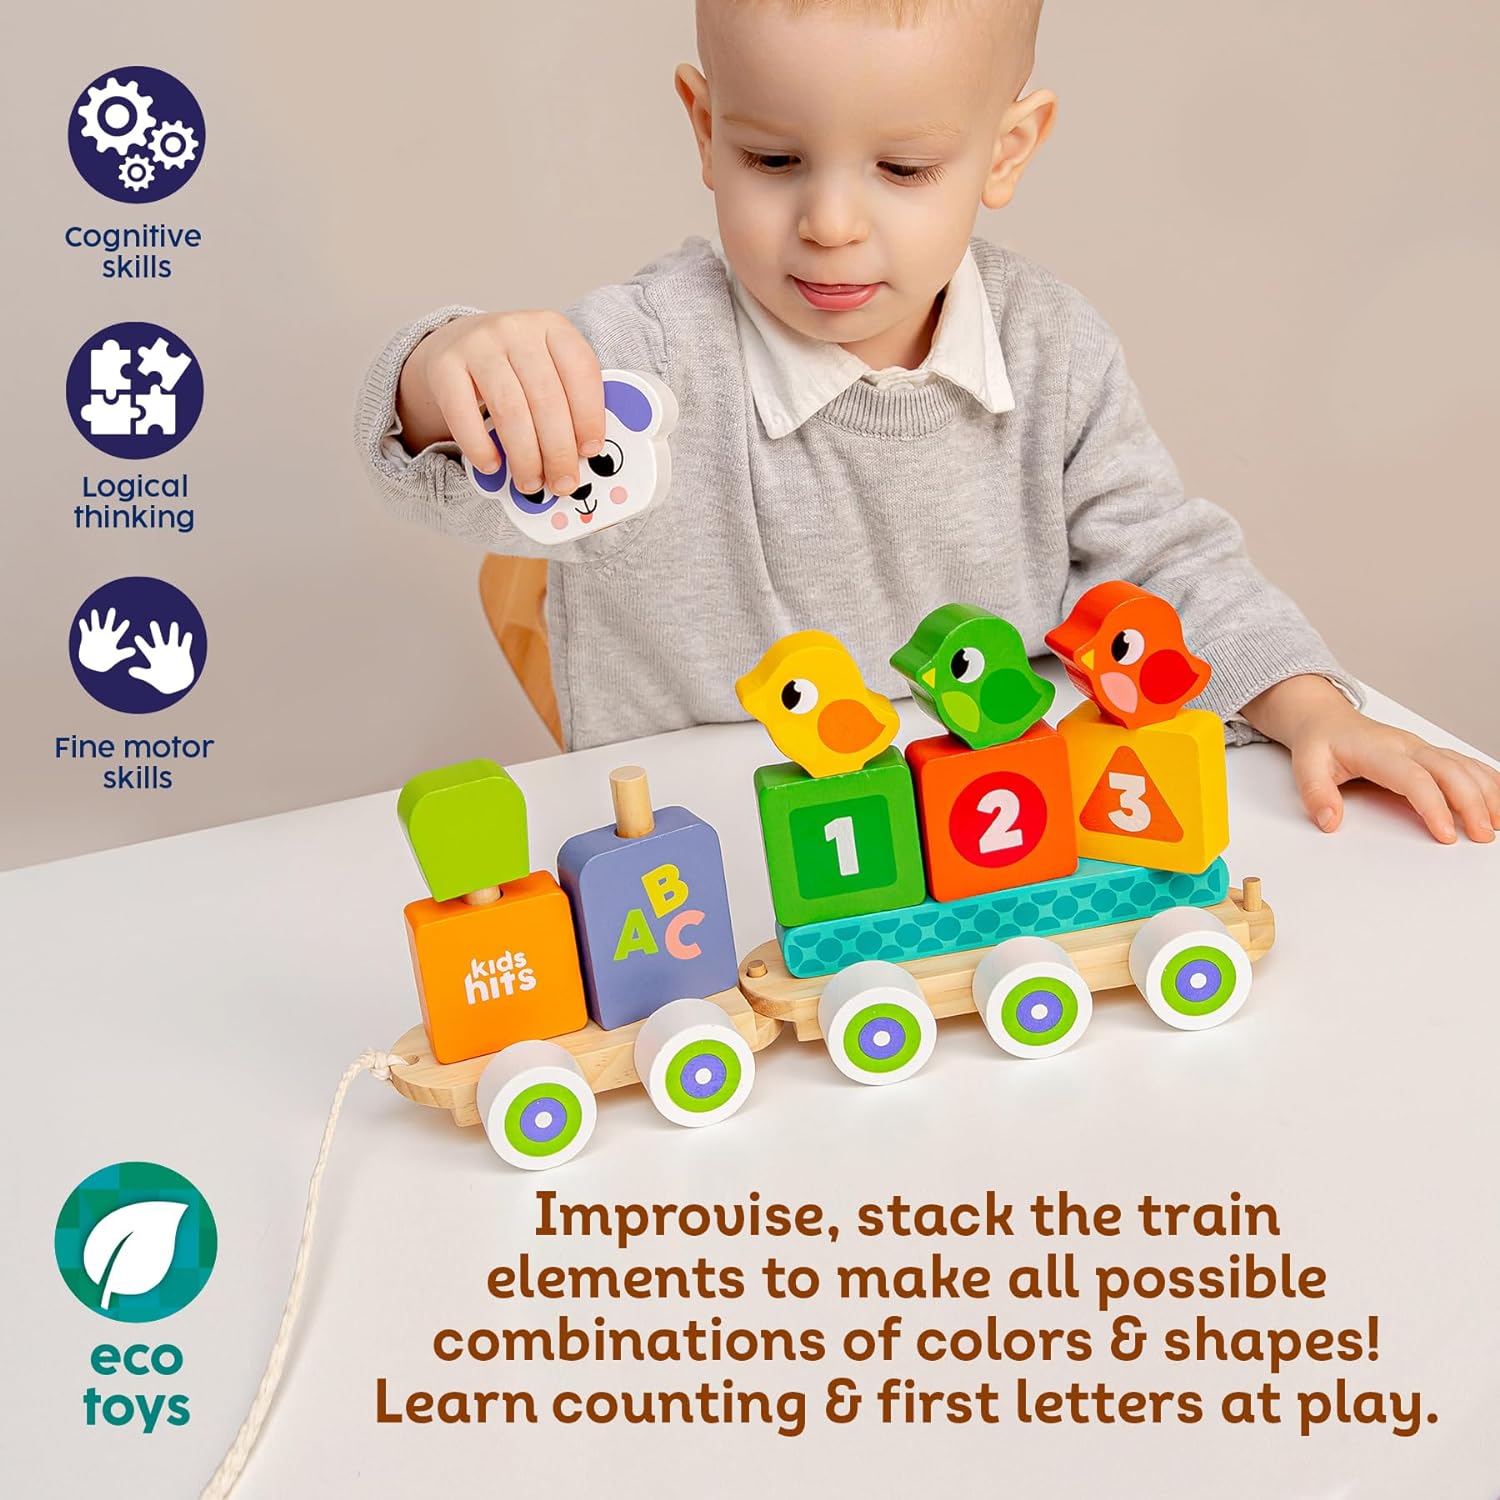 Kids Hits Wooden Stack and Go Train: All Aboard The Fun Learning Journey for Ages 1 and Up